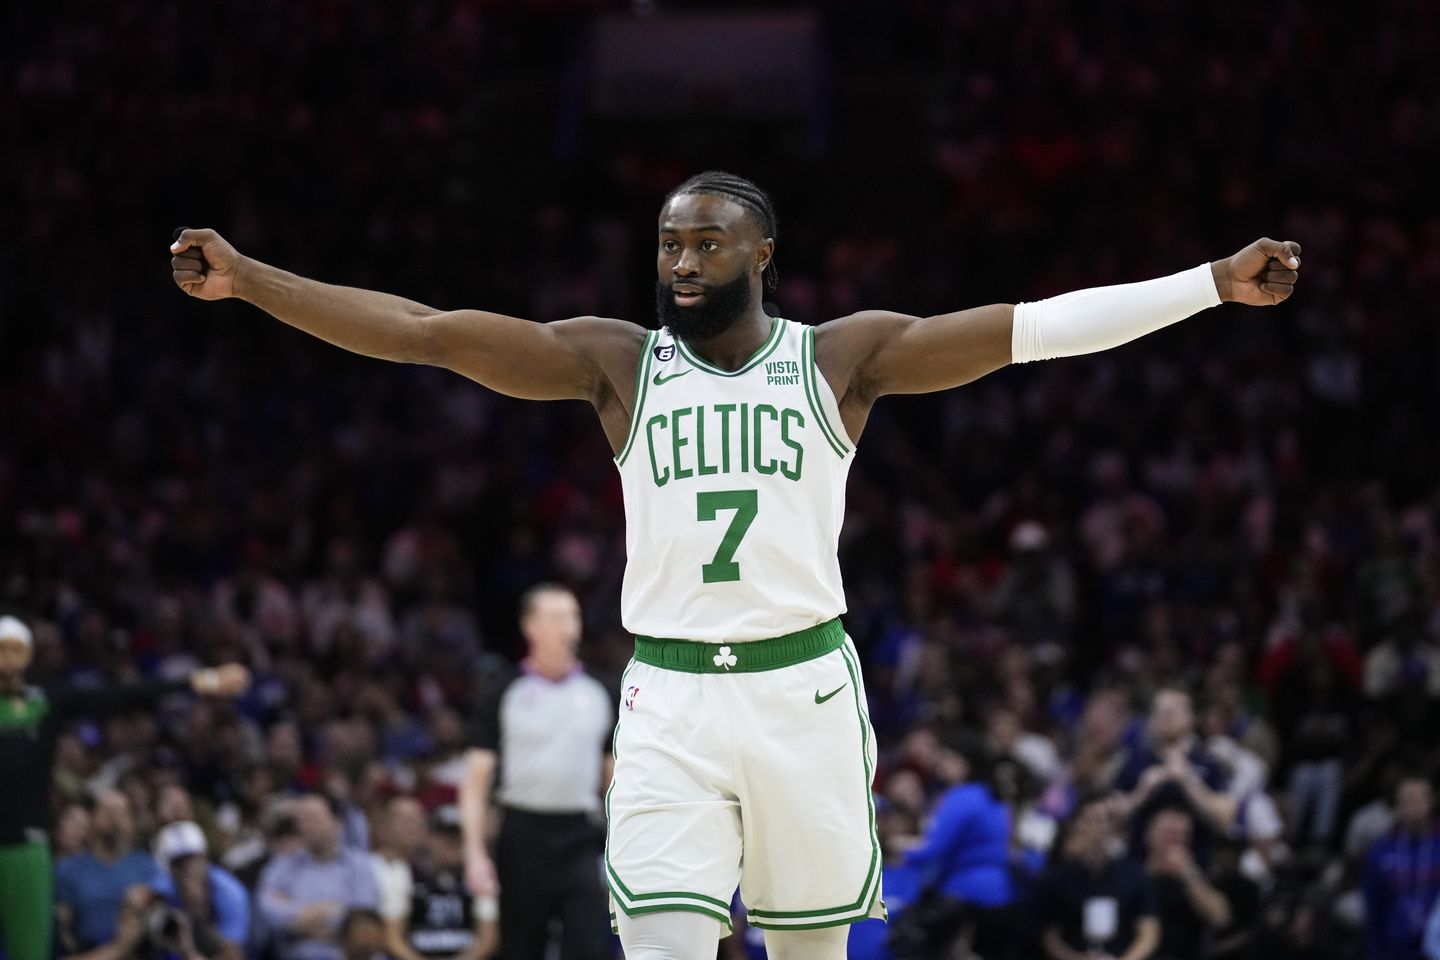 Tempers flare after Celtics' Jaylen Brown grabbed near 76ers bench in Game 7 matchup